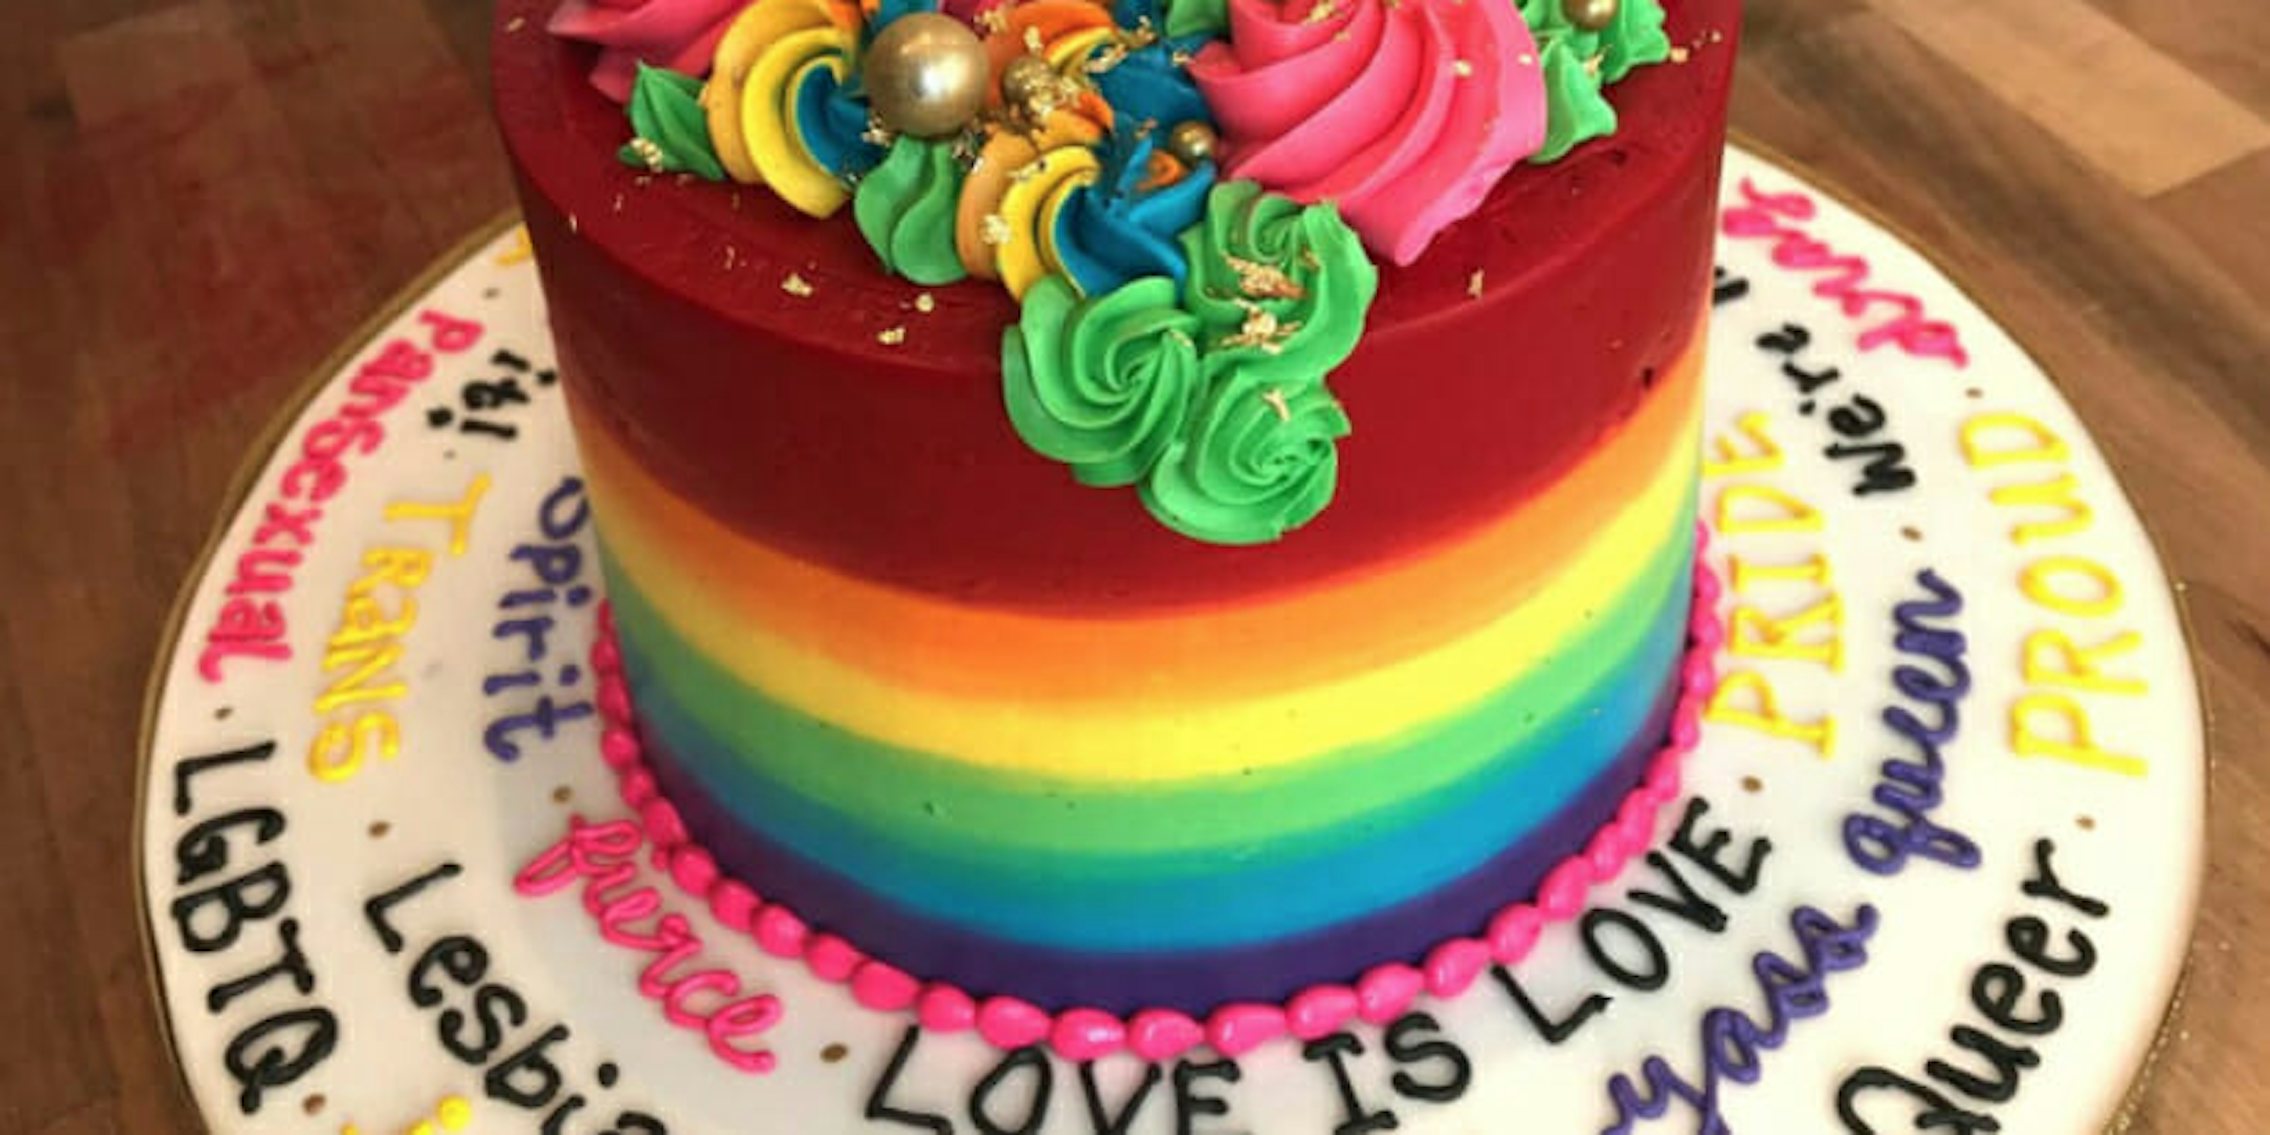 Chris Farias asked a Canadian bakery to make him the 'gayest cake ever.'